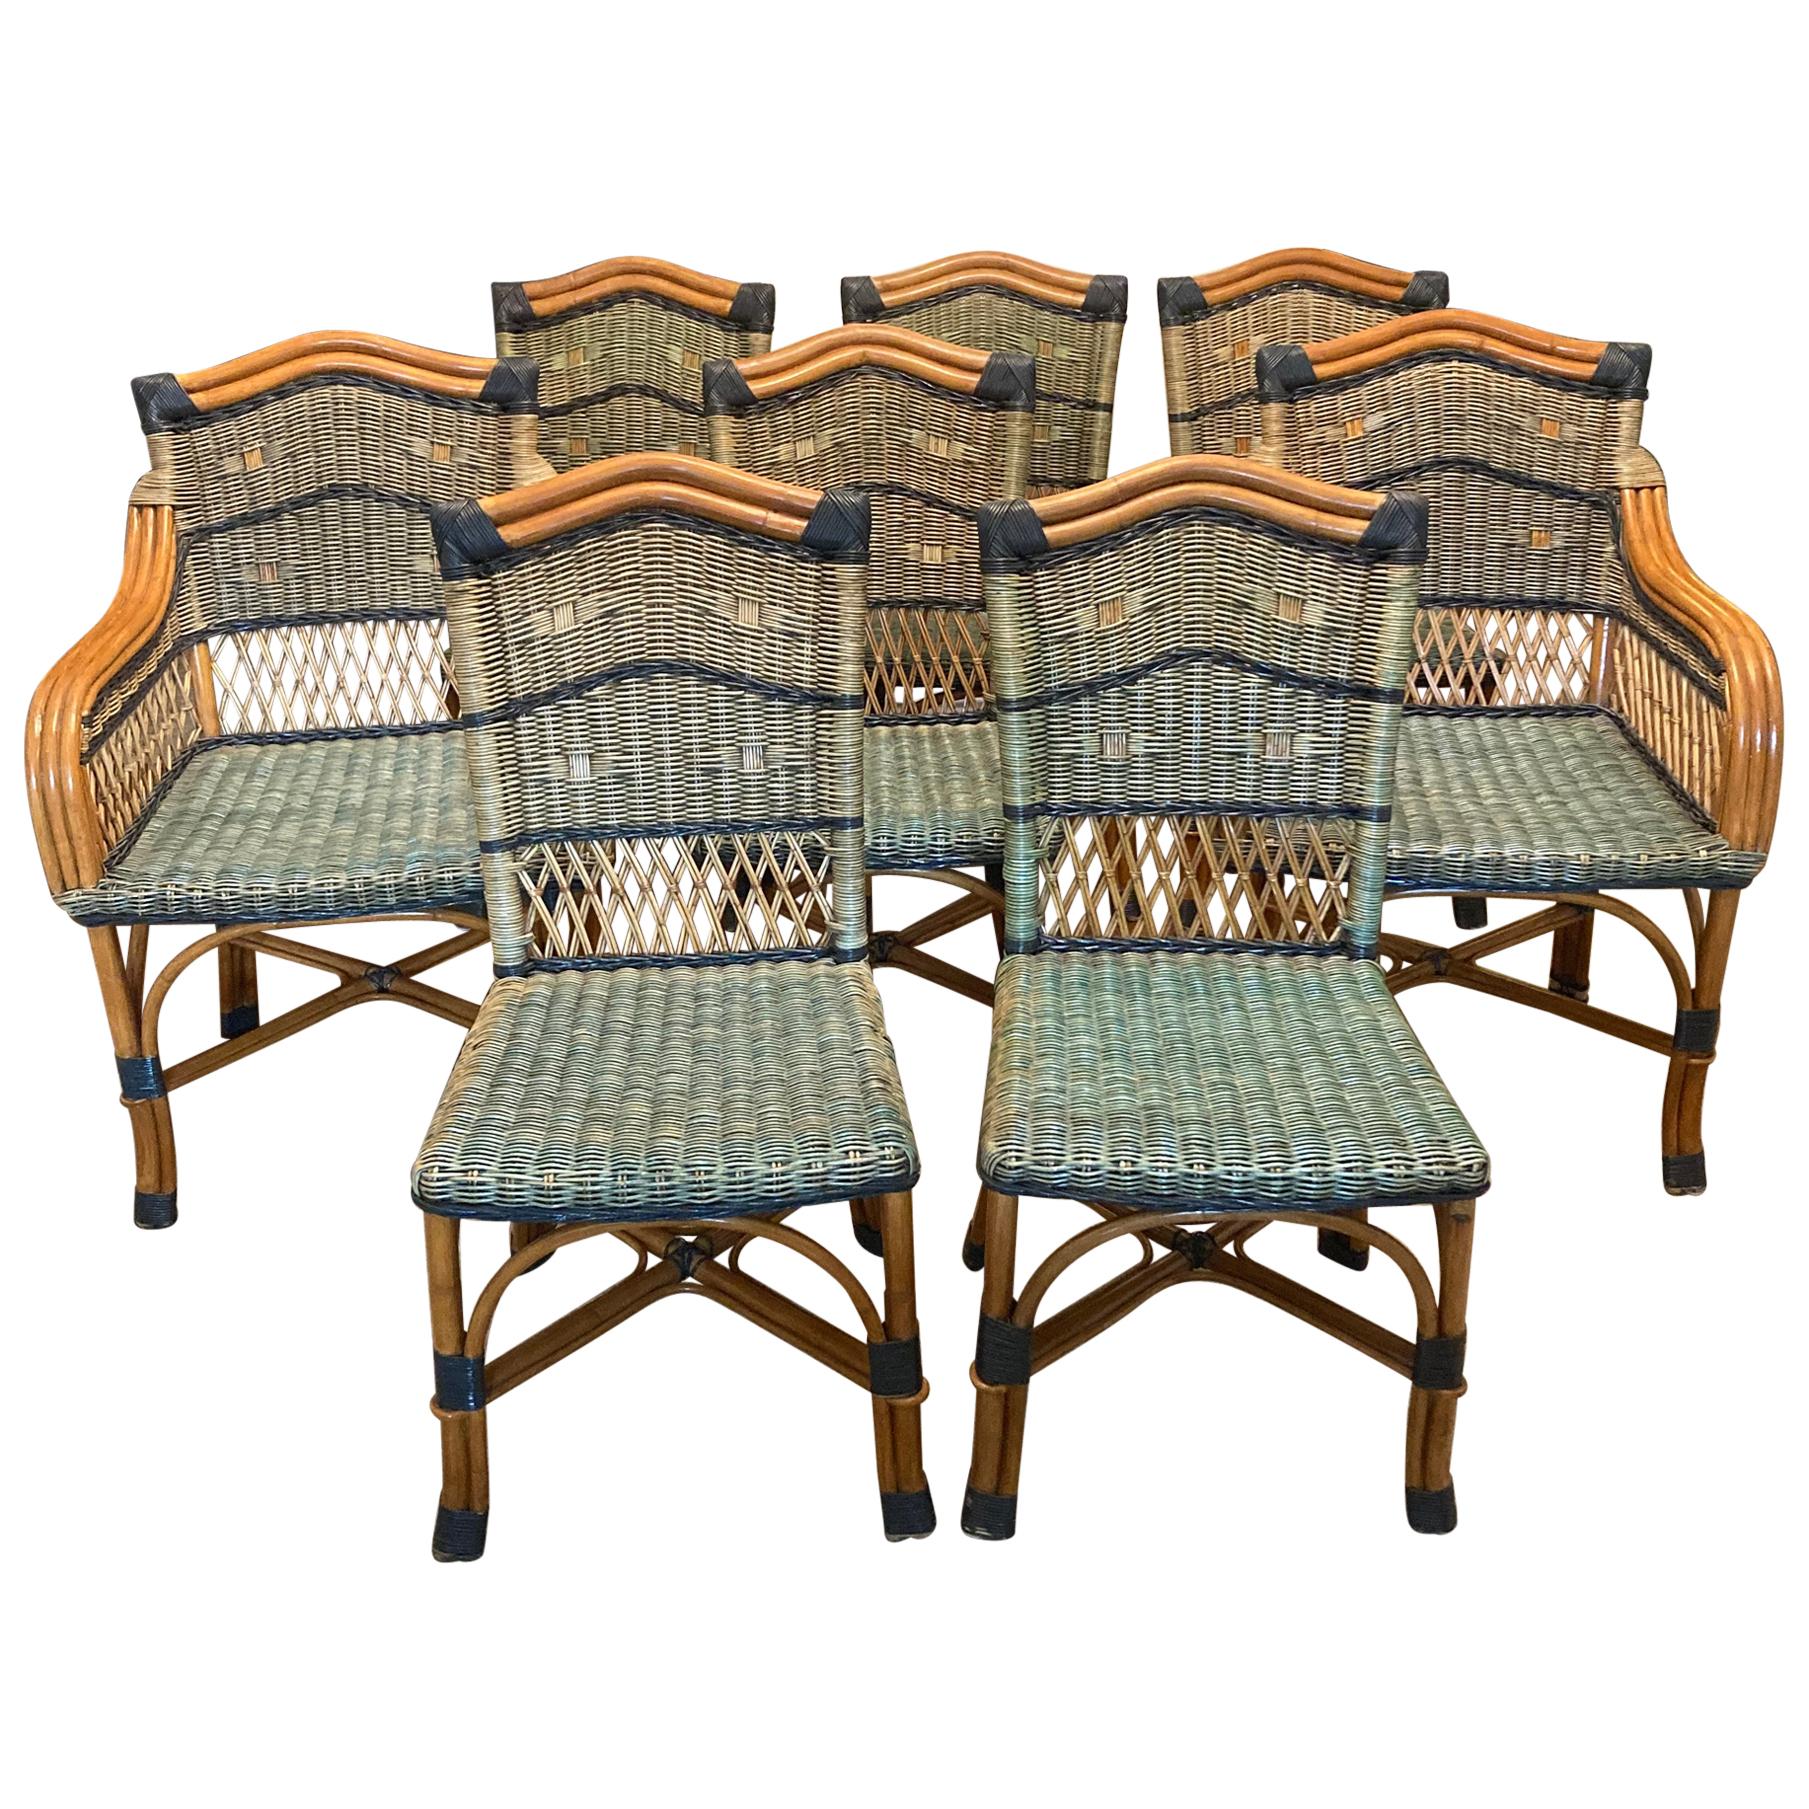 Charming Set of 8 Grange Stained Rattan and Wood Dining Chairs